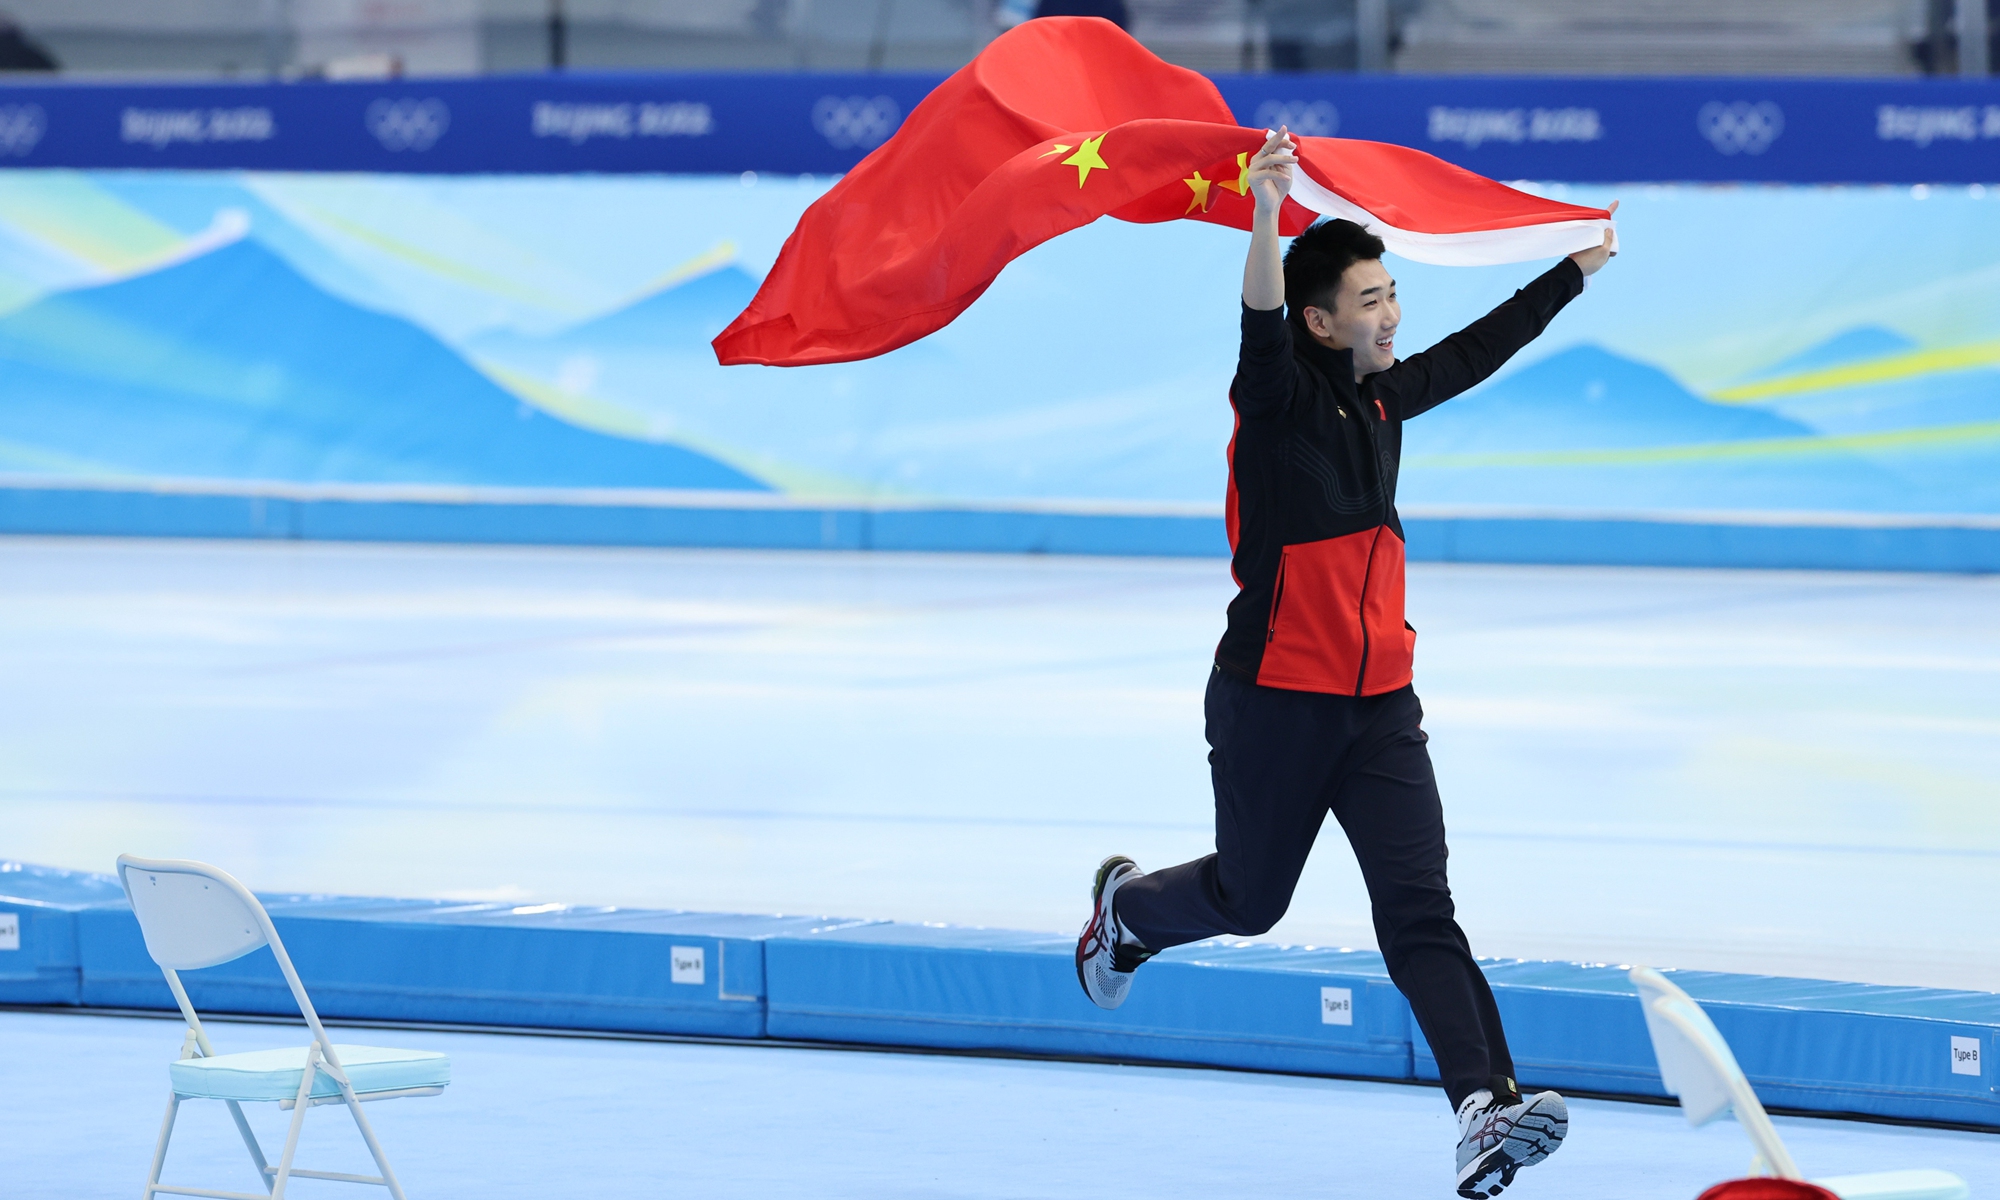 Live from Beijing 2022 Chinas Gao Tingyu wins mens 500m speed skating gold